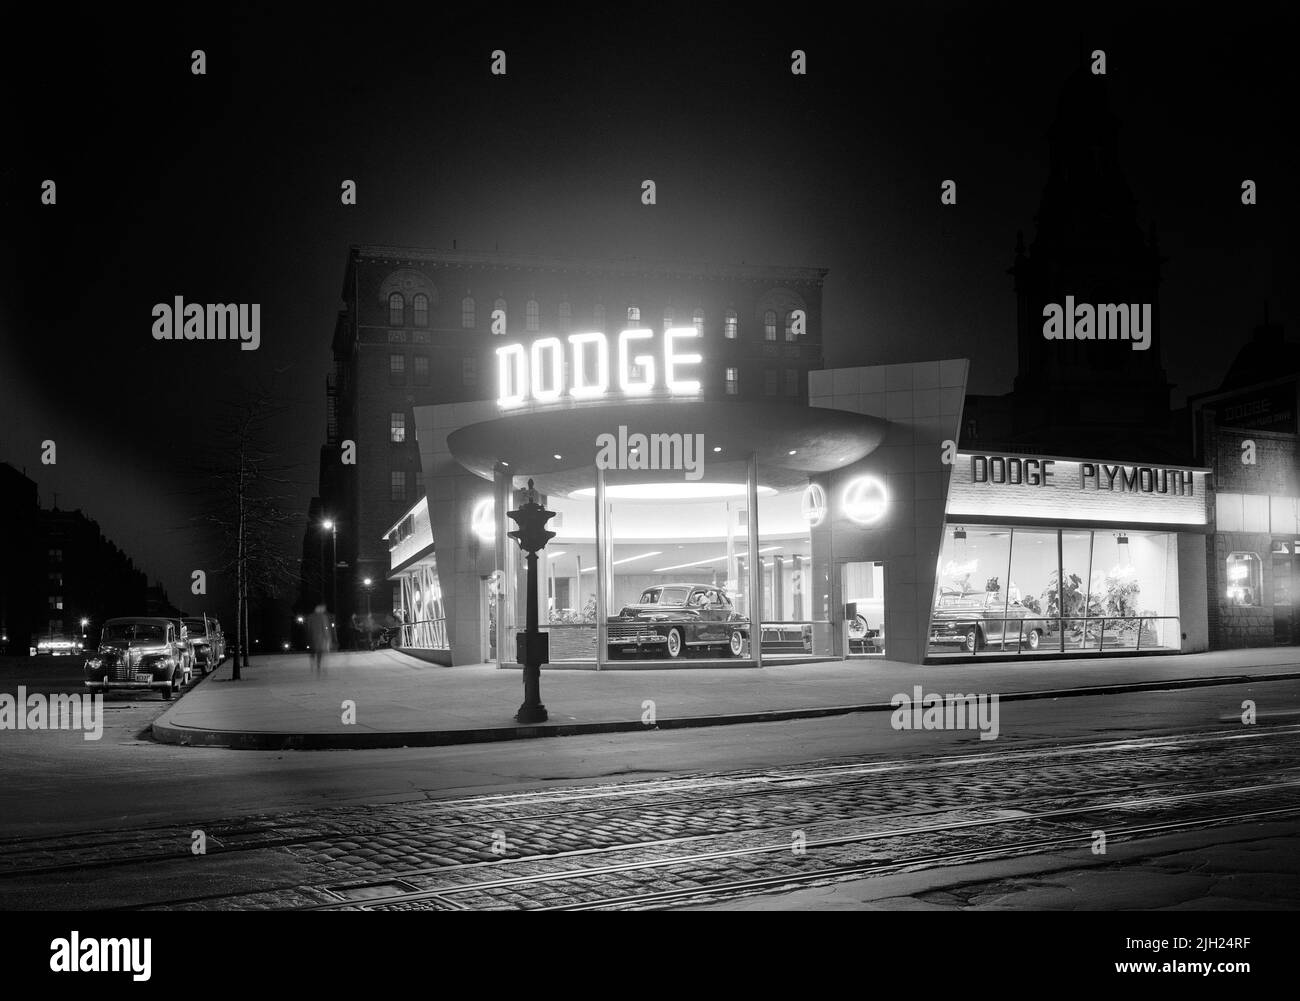 L Motors, Dodge Car Showroom at Night, Broadway at 177th Street, New York, USA, Gottscho-Schleisner Collection, March 1948 Stock Photo